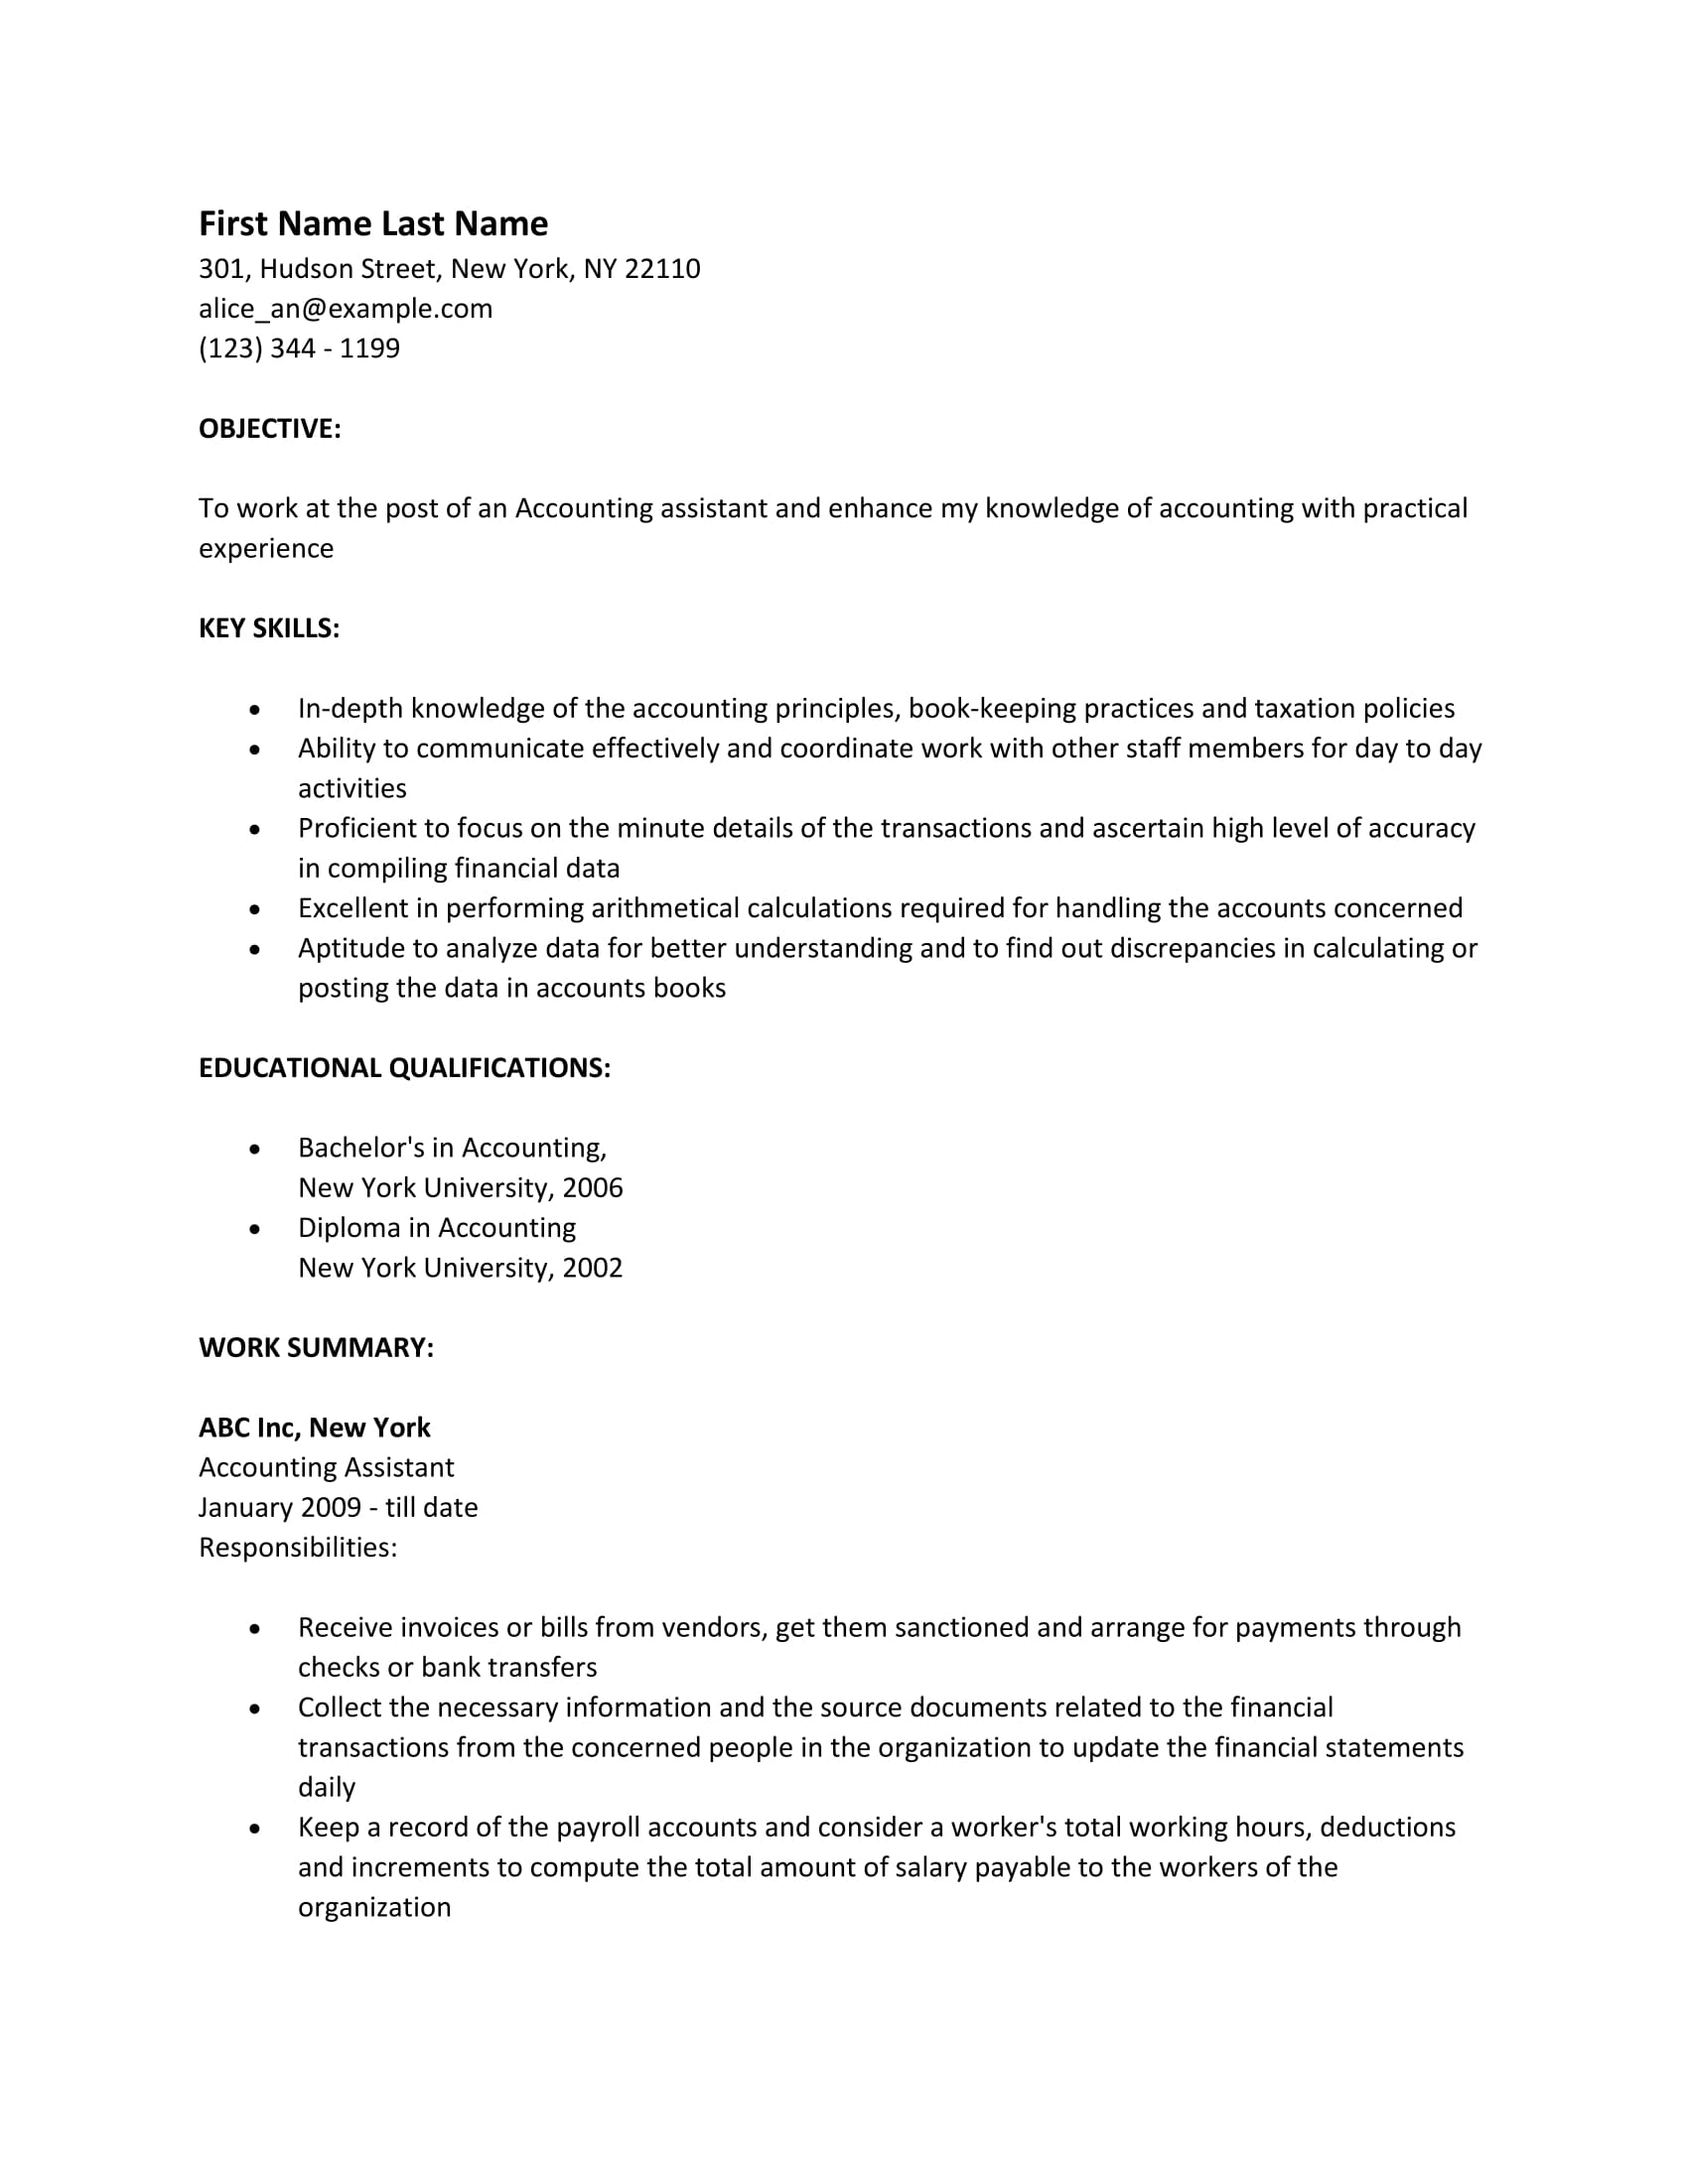 accounting assistant resume example